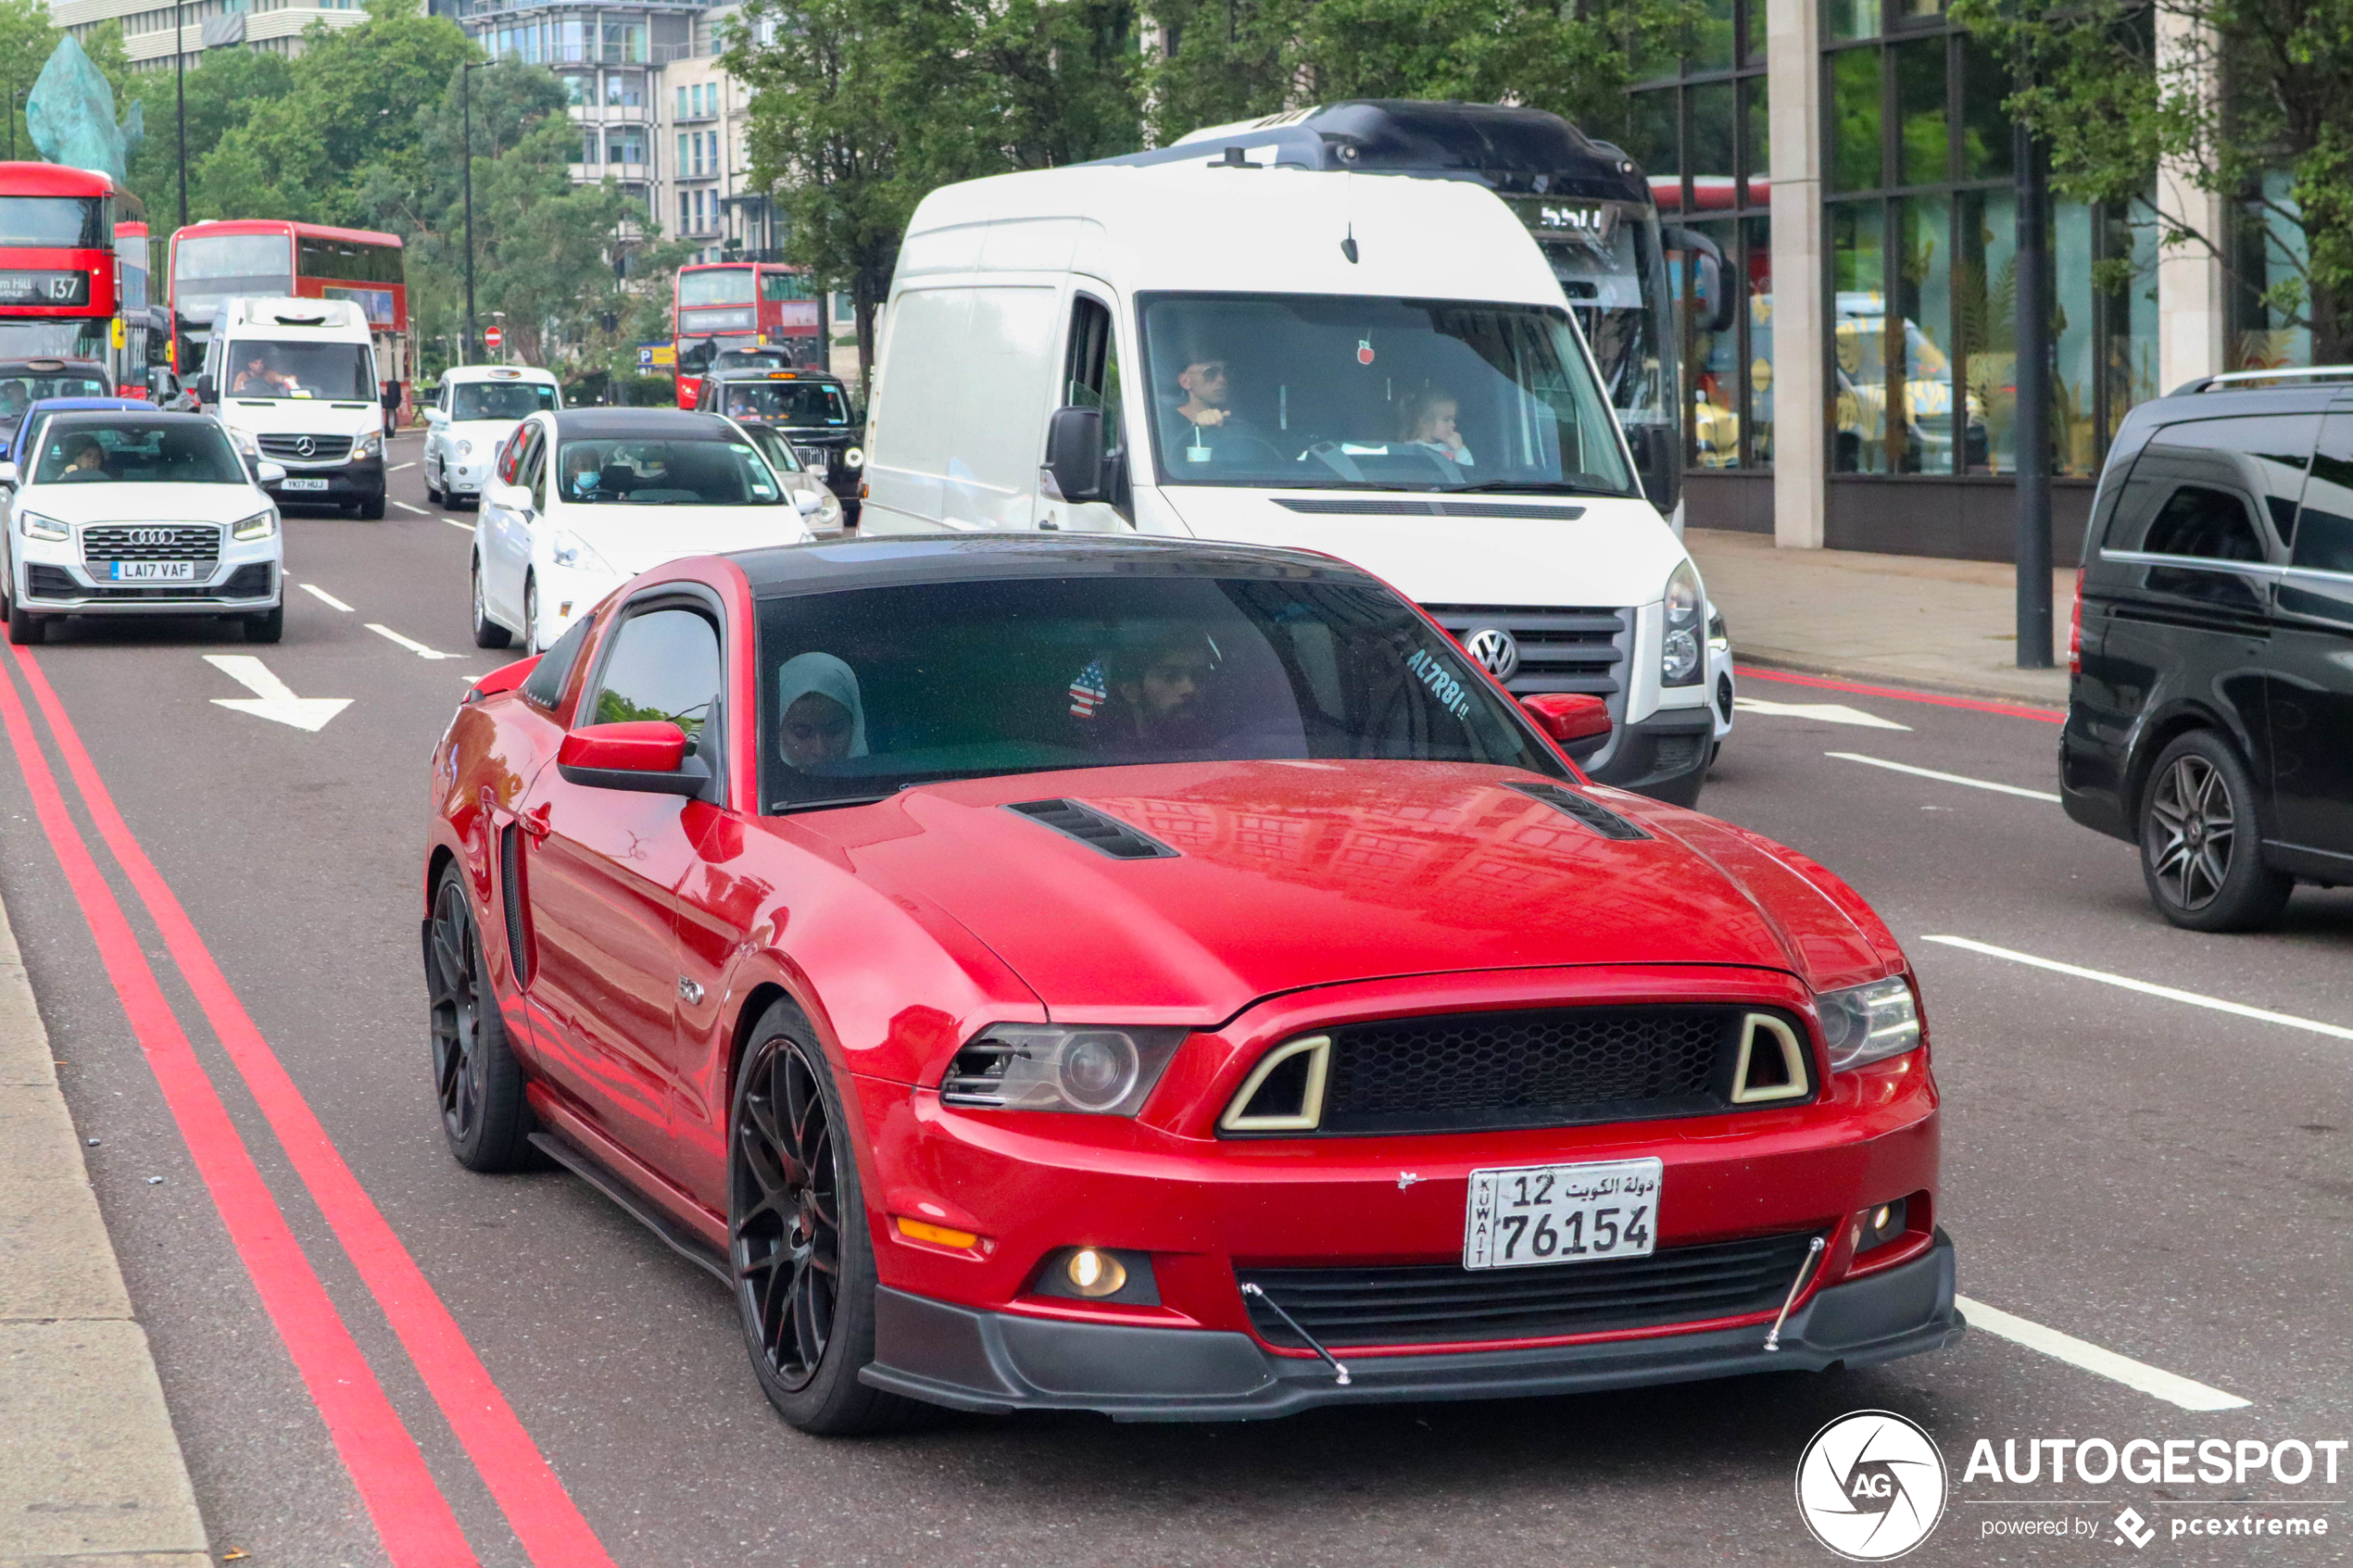 Ford Mustang GT 2013 RTR Package